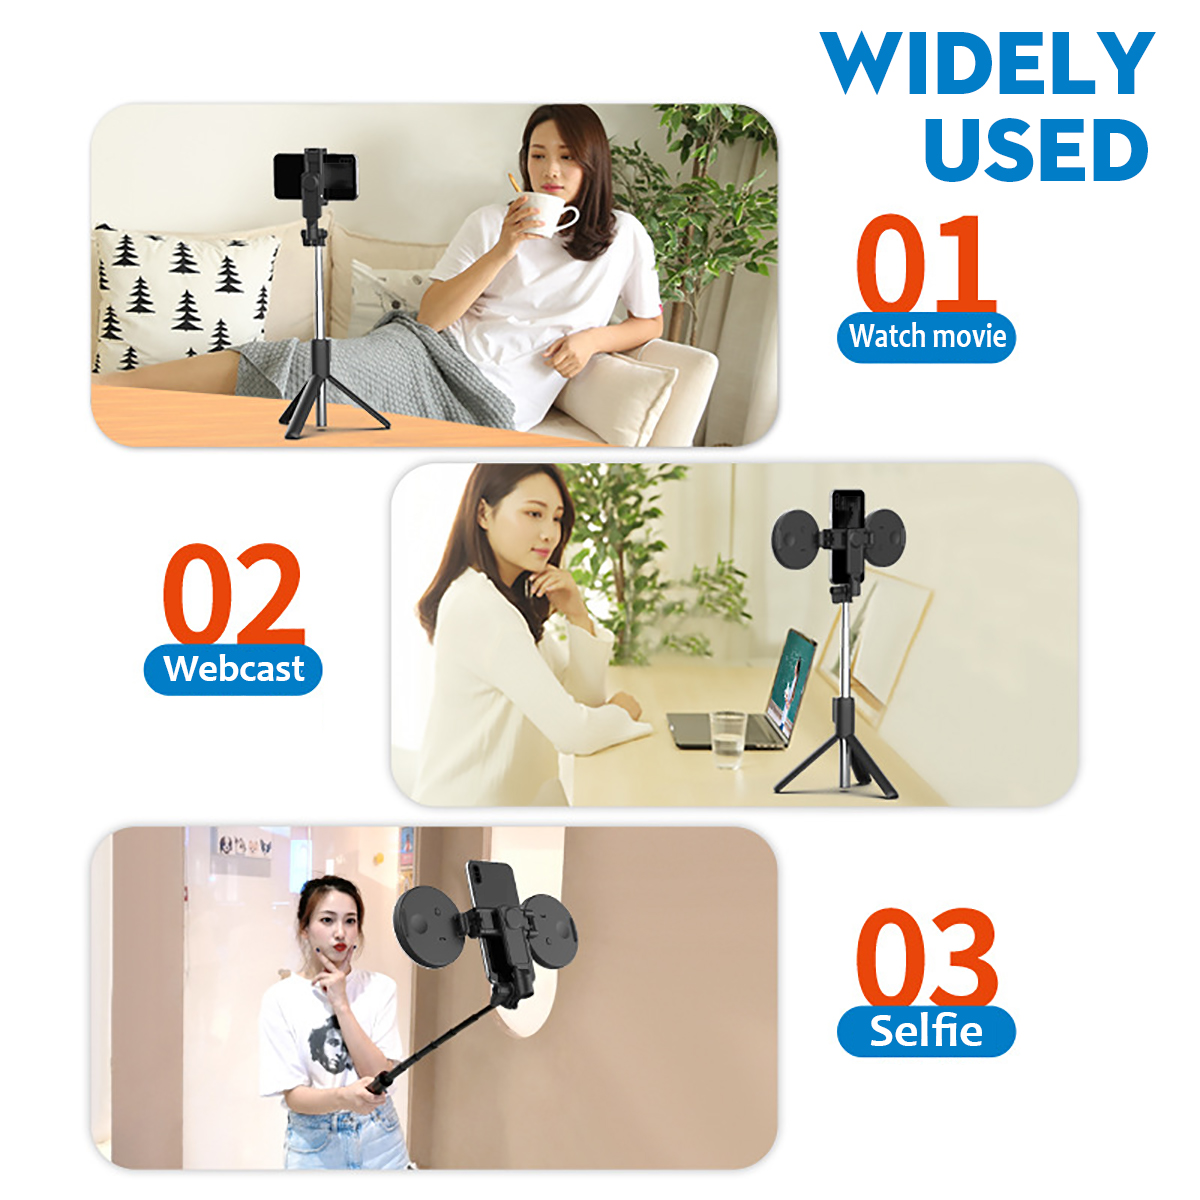 Telescopic-Fill-Light-Multifunctional-bluetooth-Selfie-Stick-Tripod-Outdoor-Mobile-Phone-Photography-1760893-4